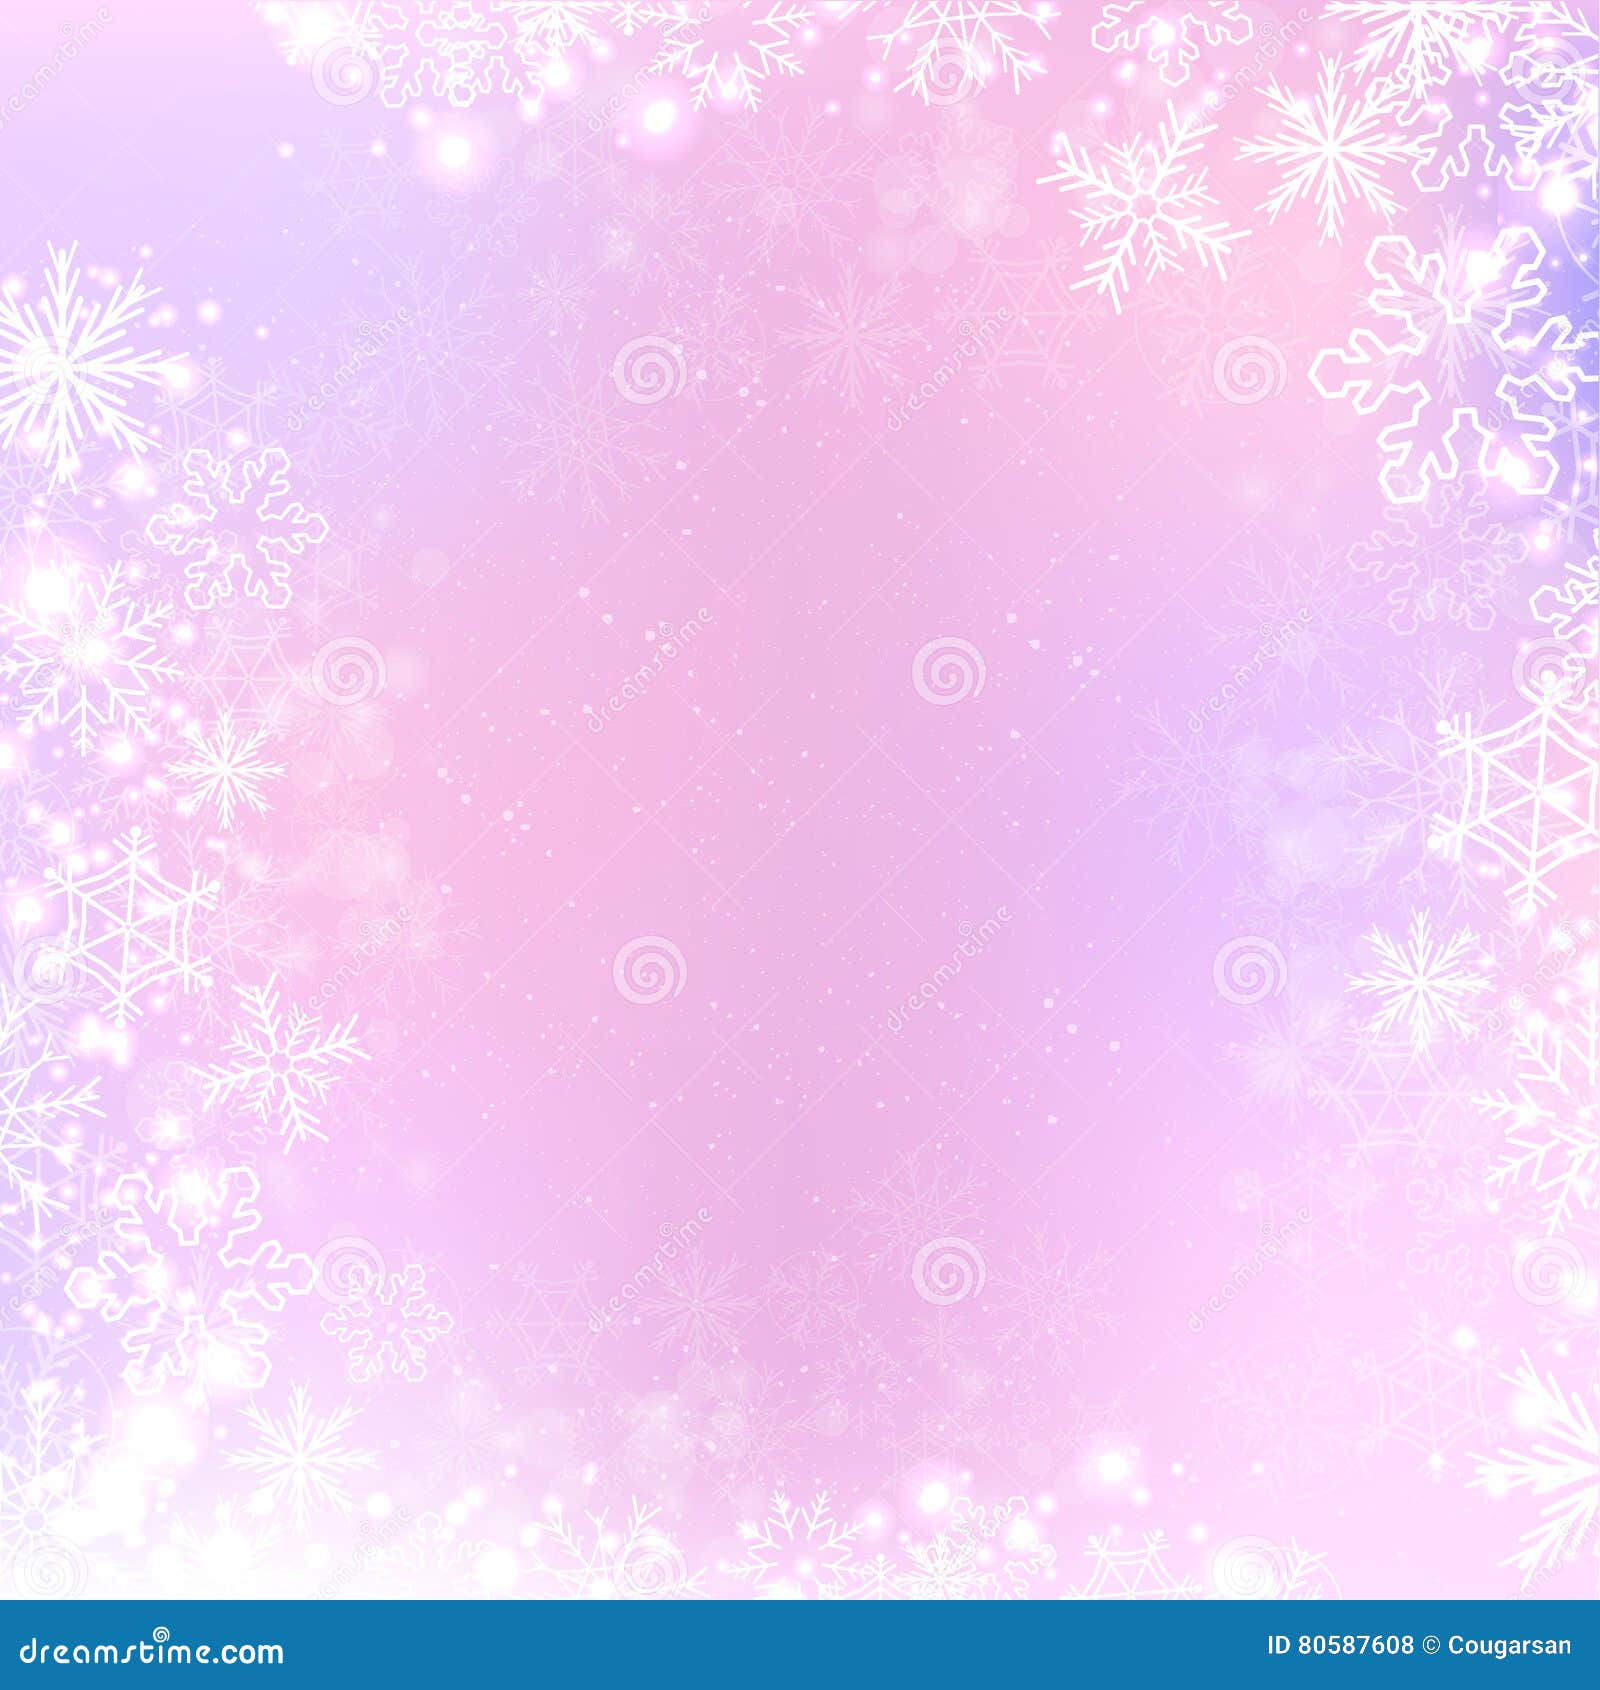 Gradient Winter Square Banner Background with Snowflake Stock Vector ...